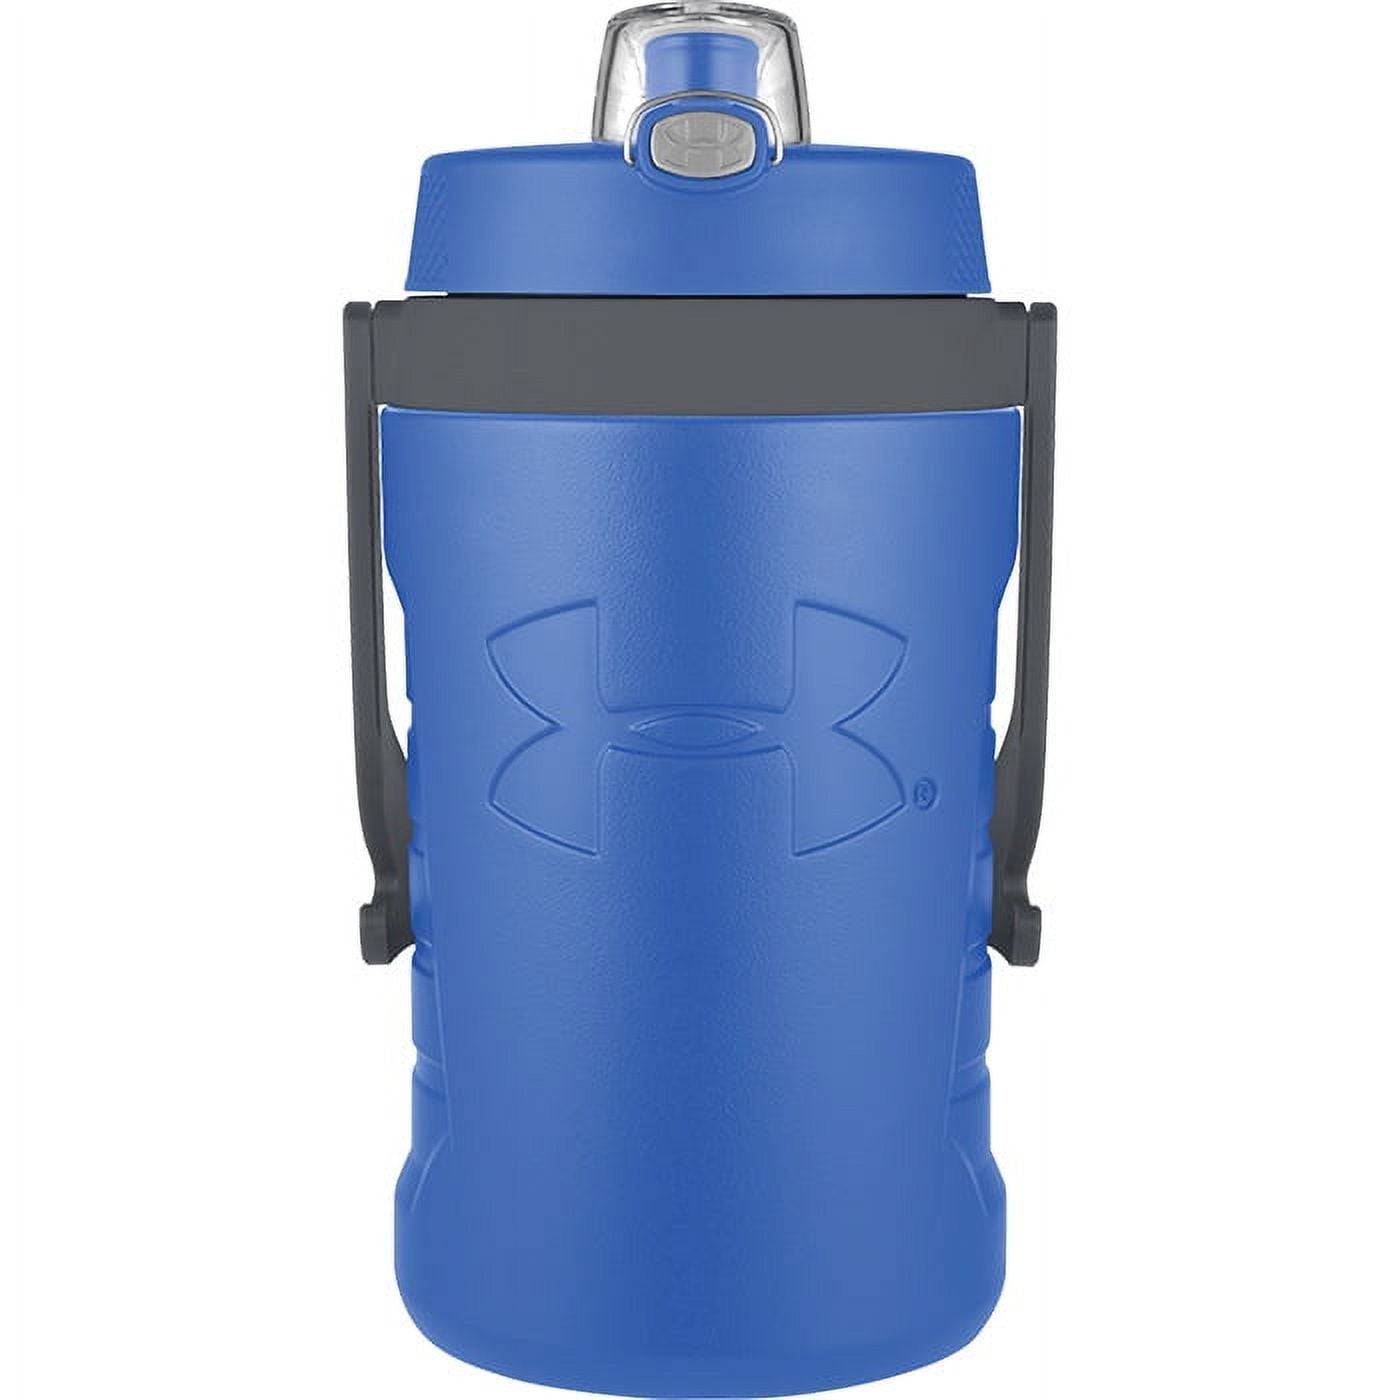 Under Armour® Flip Top Water Bottle 16-Oz. - Personalization Available